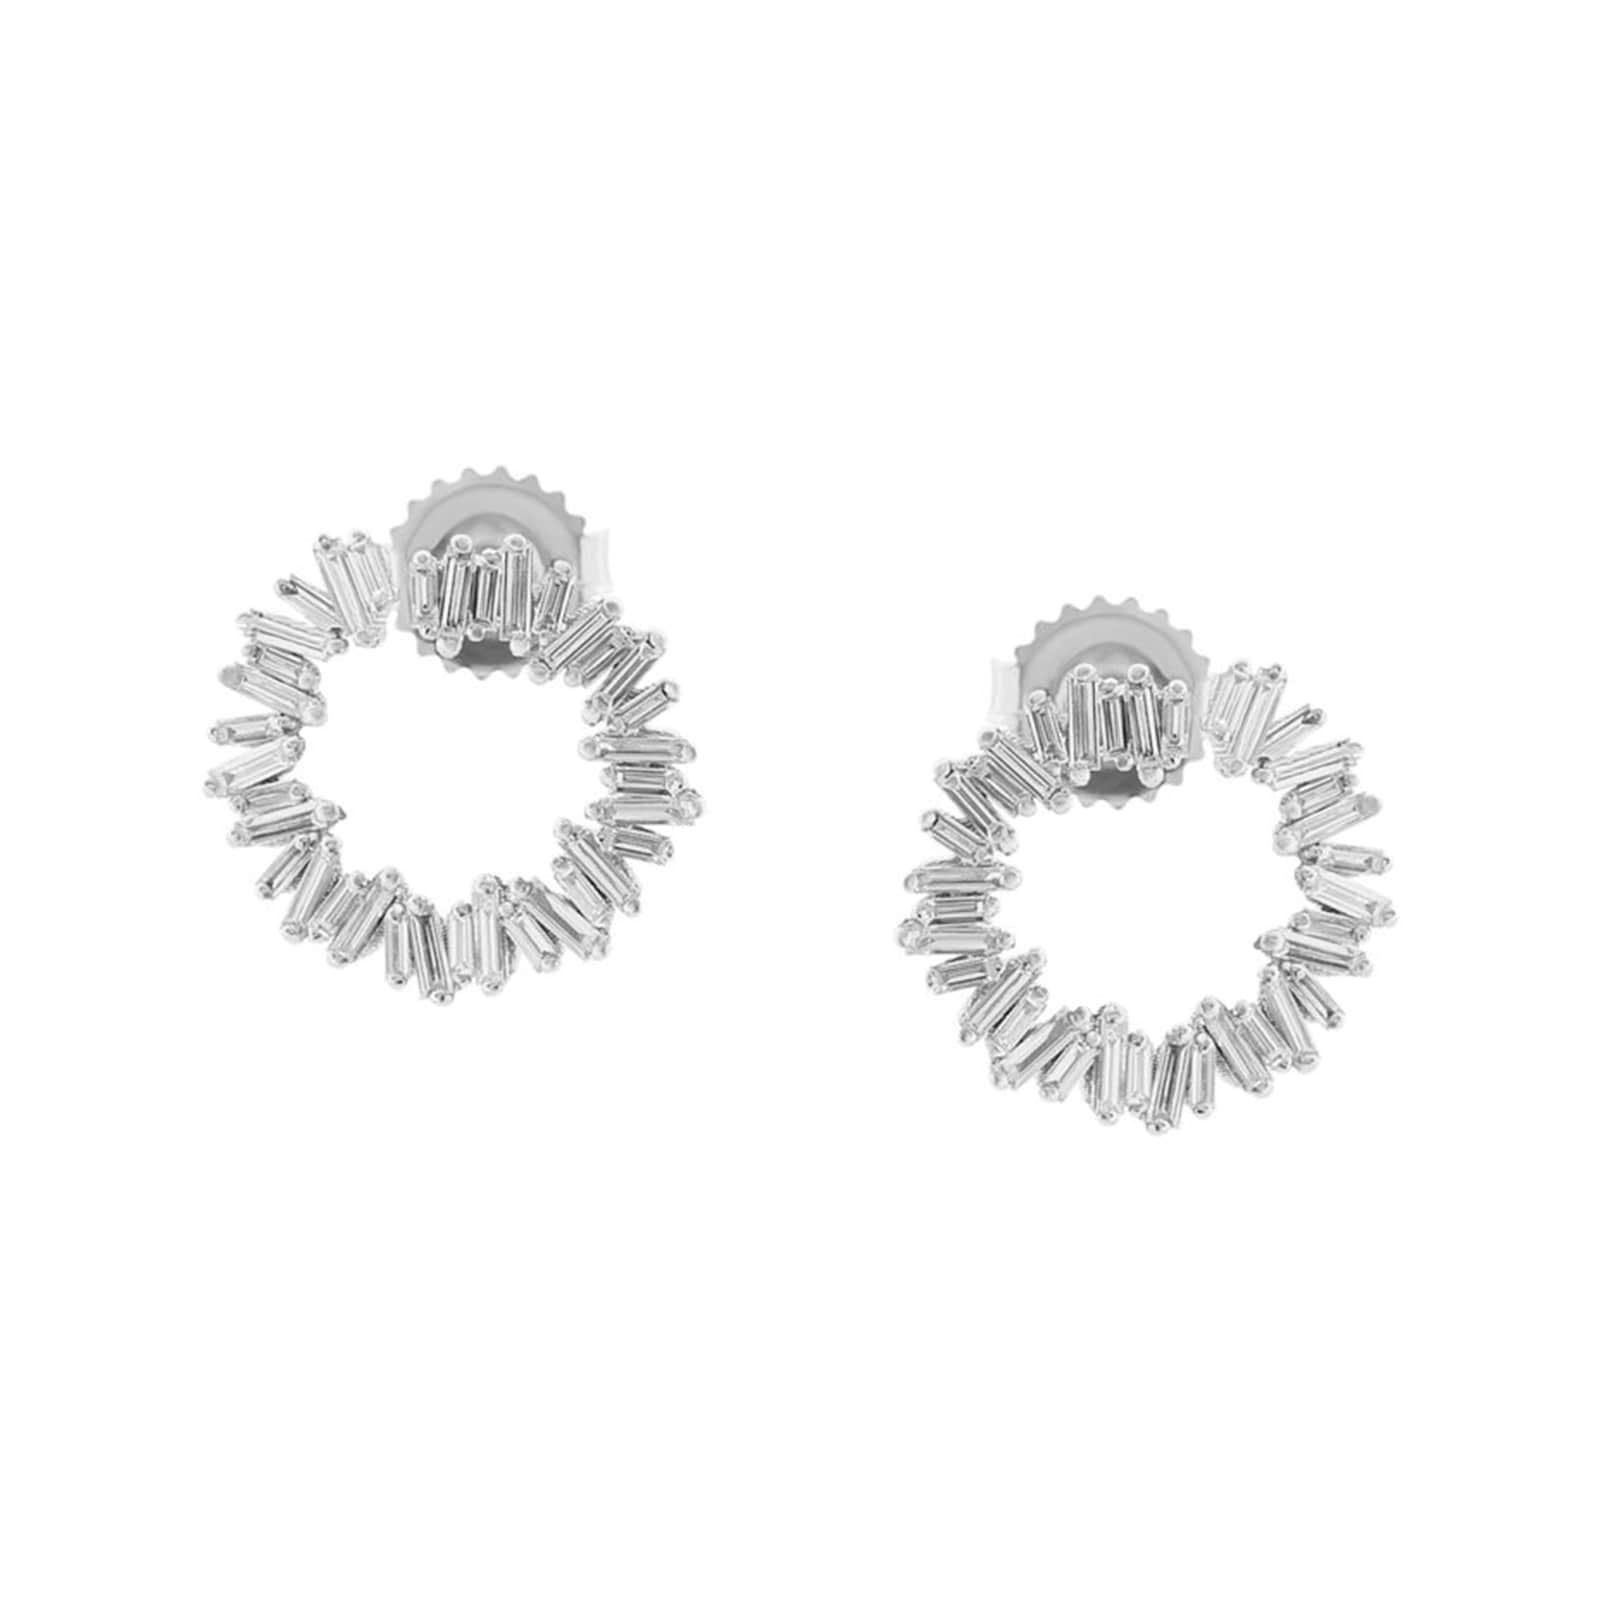 Classic Spiral 18ct White Gold 16mm Hoop 0.87cttw Diamond Earrings